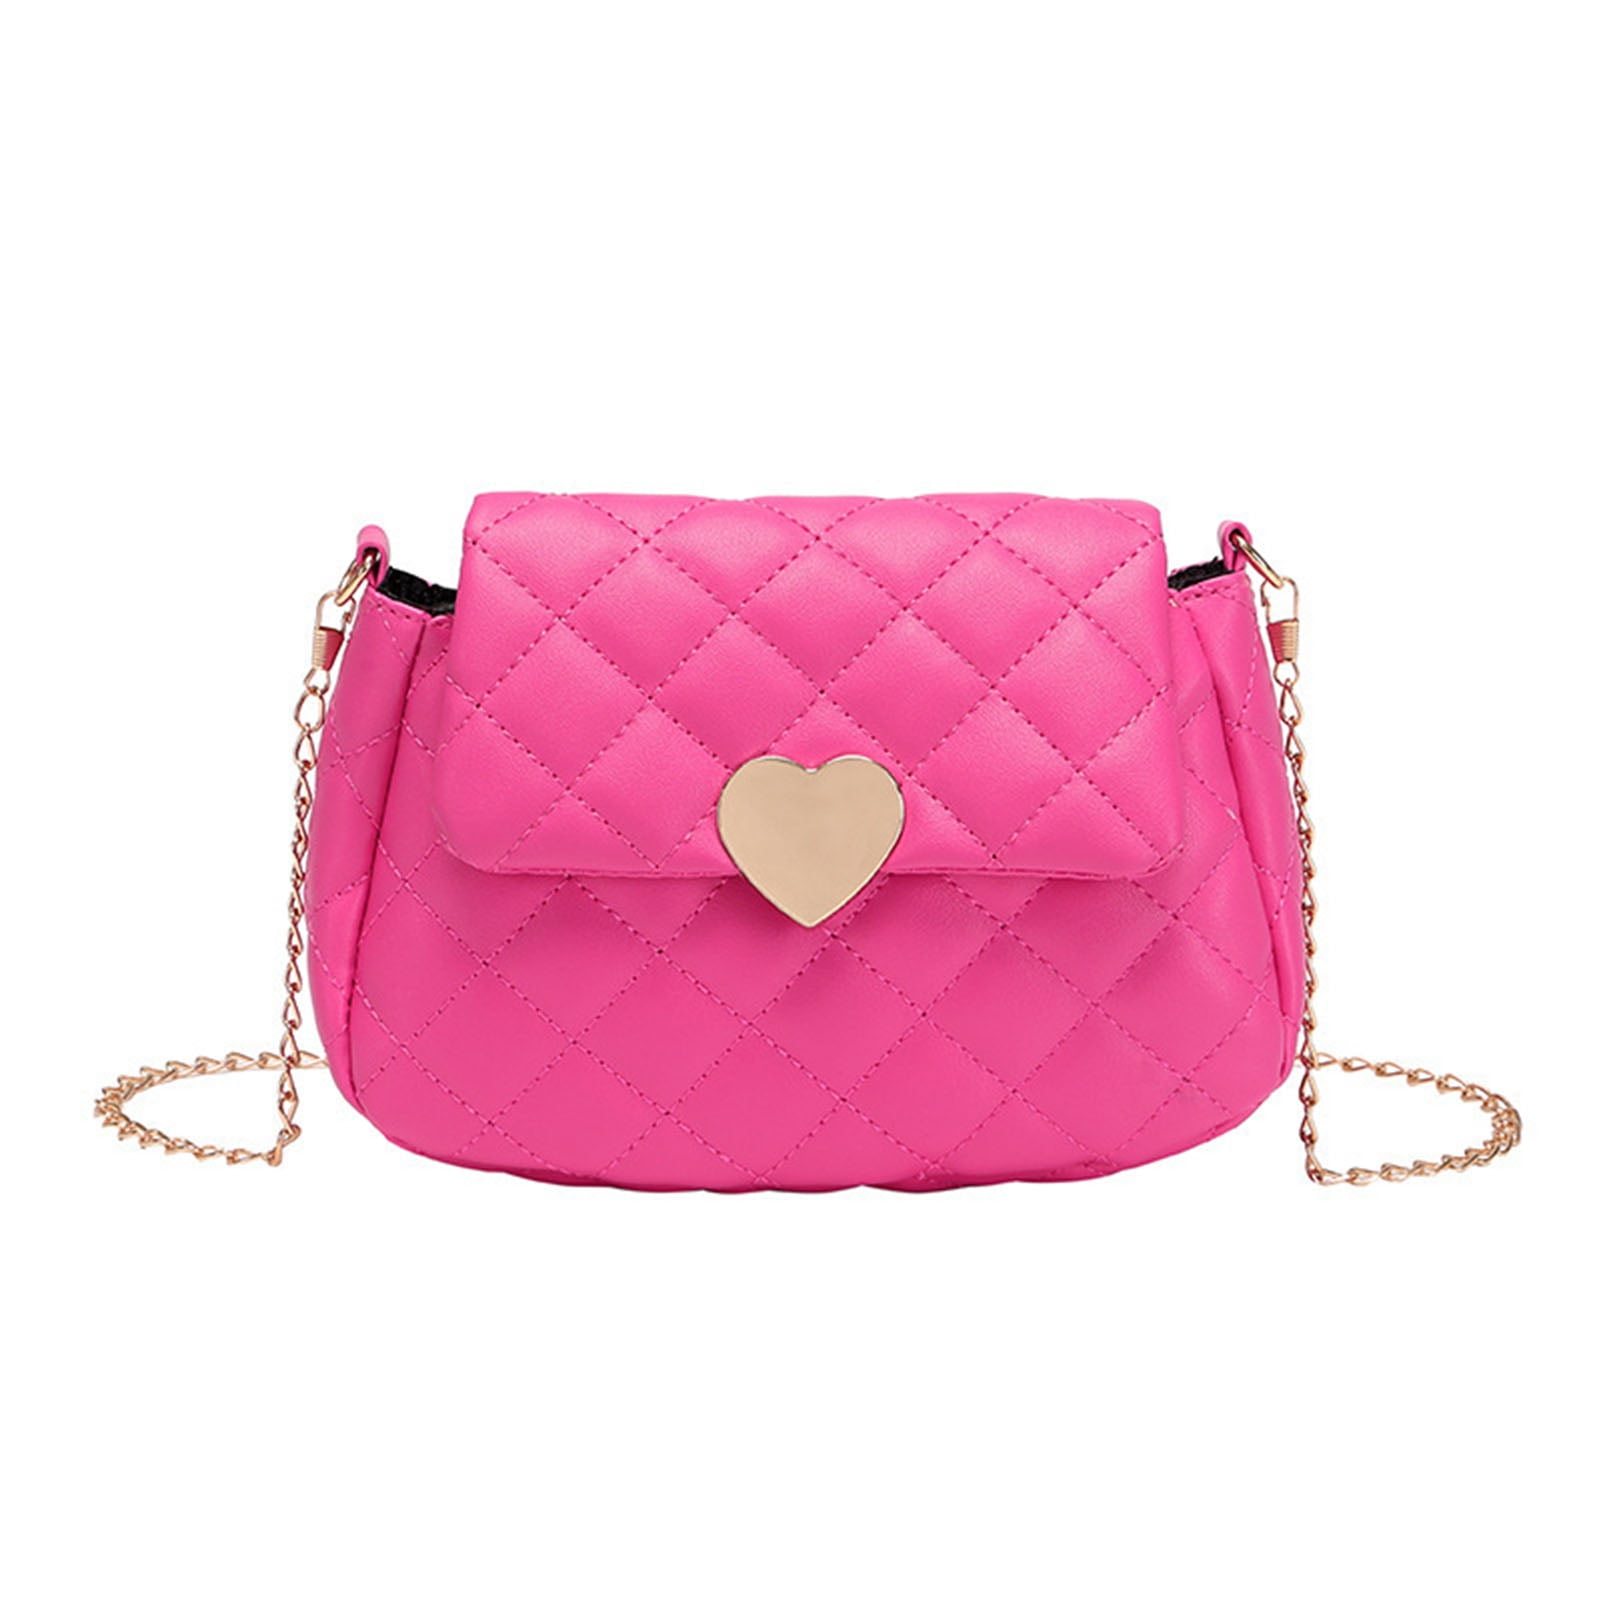 Discover a full selection of designer inspired handbags, women fashion bags,  shoulder bags, flap bags, evening purses for a reasonable price! 20% OFF or  Buy One Get One Free! Free Worldwide Shipping!